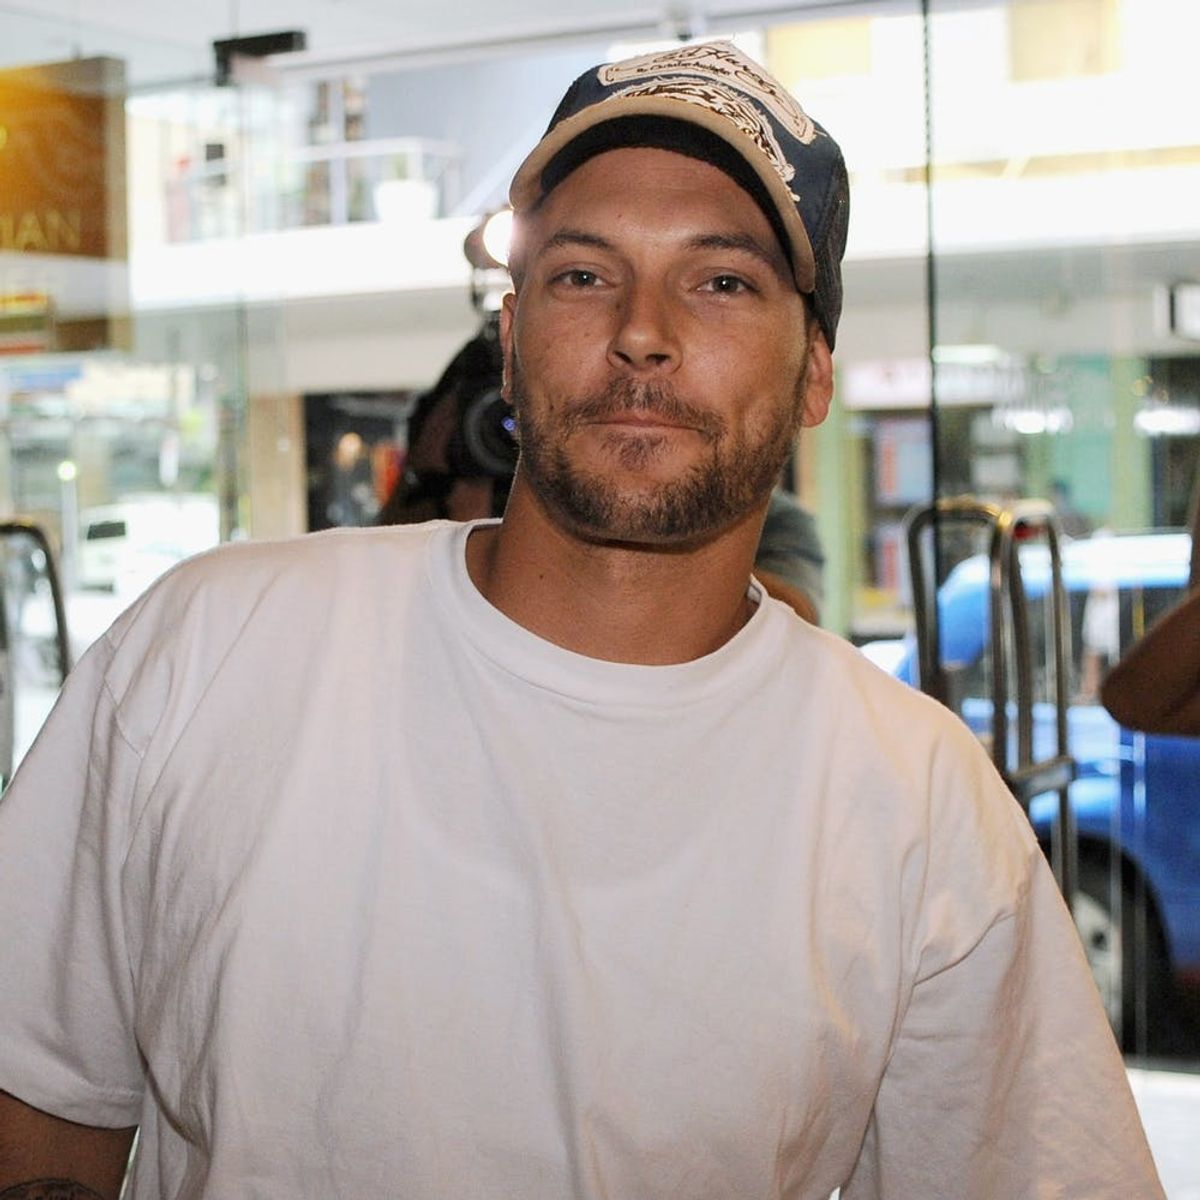 Kevin Federline Revealed What It’s Like to Co-Parent With Britney Spears